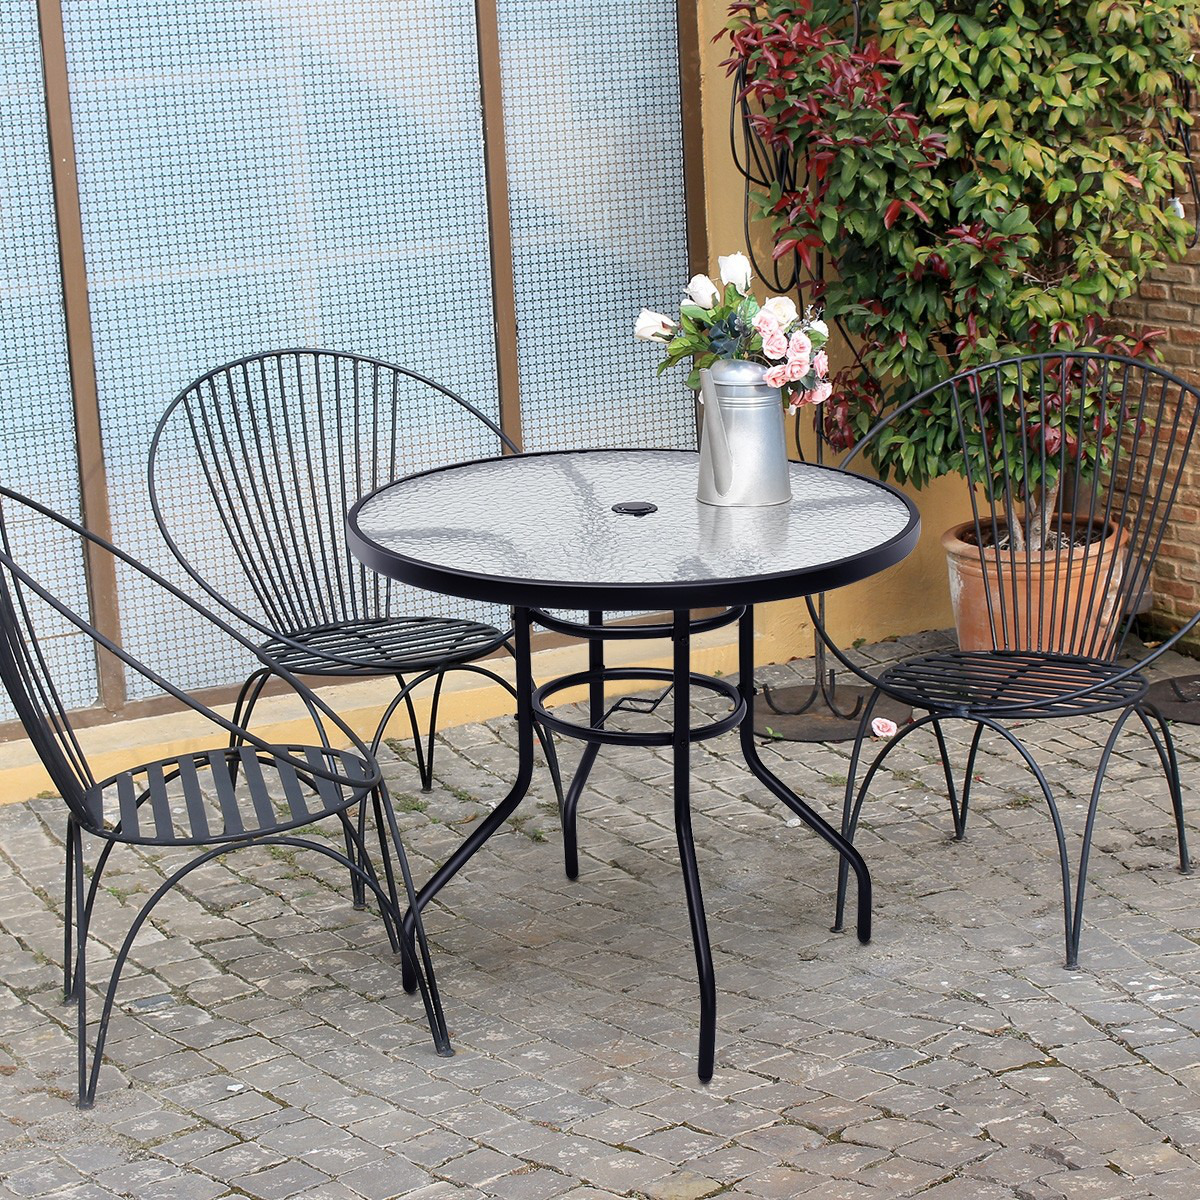 Goorabbit Outdoor Table With Umbrella Hole,Outdoor Round Tempered Glass Table Patio Metal Frame Dining Table, All Weather Outside Table for Garden,31.5x31.5x28.3",Black - image 3 of 9